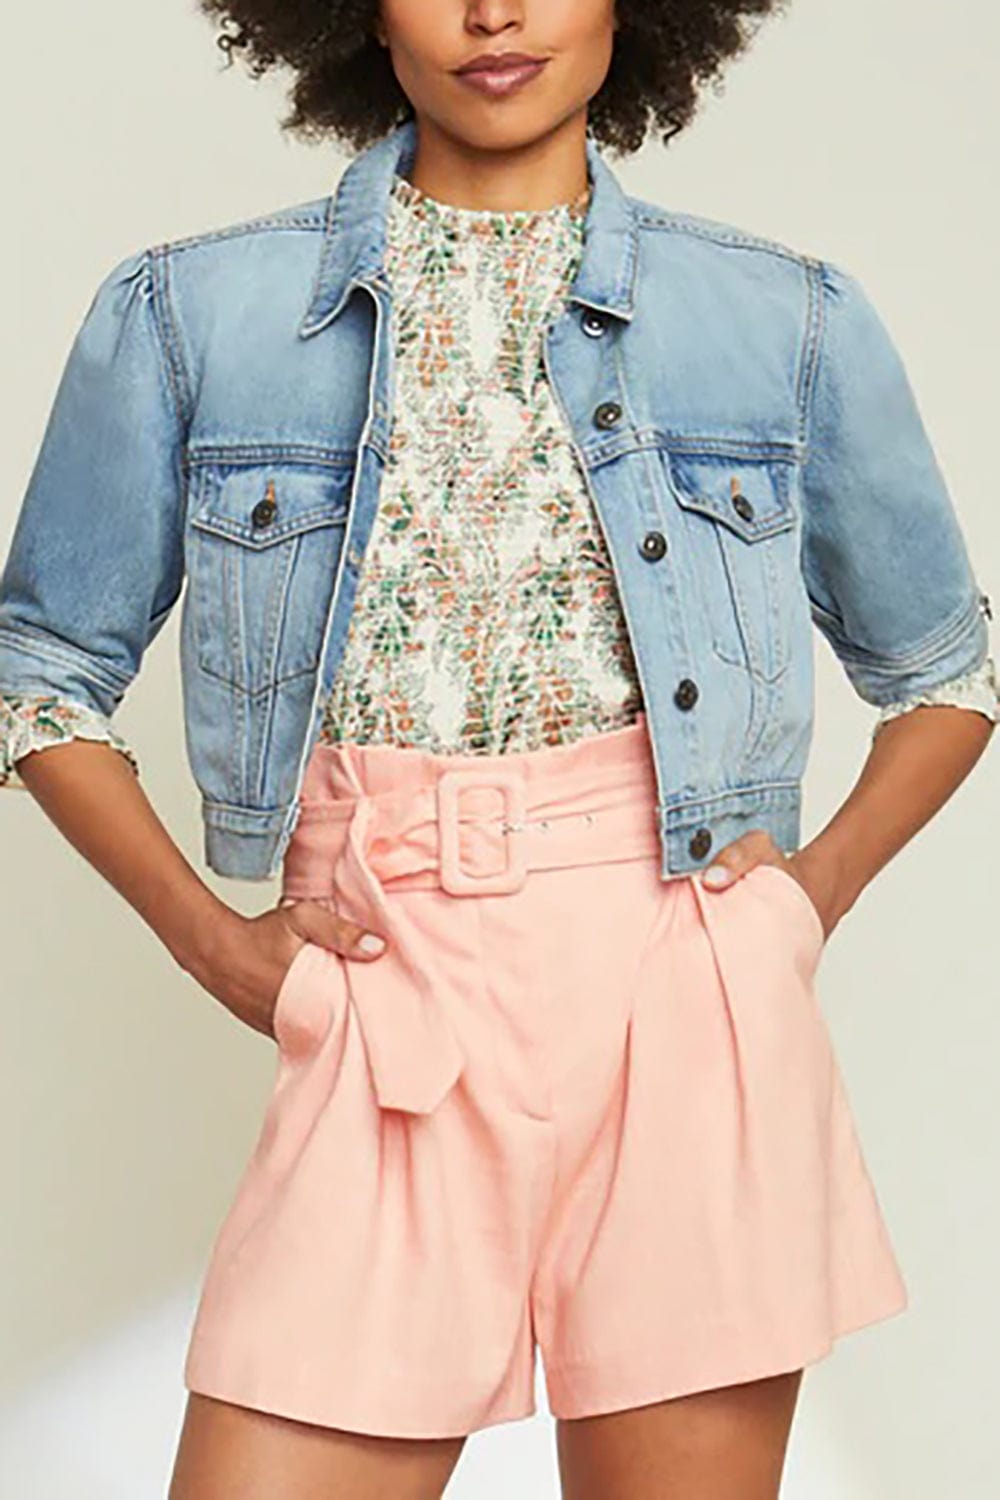 Buy Stylish Half Sleeves Denim Jackets Collection At Best Prices Online